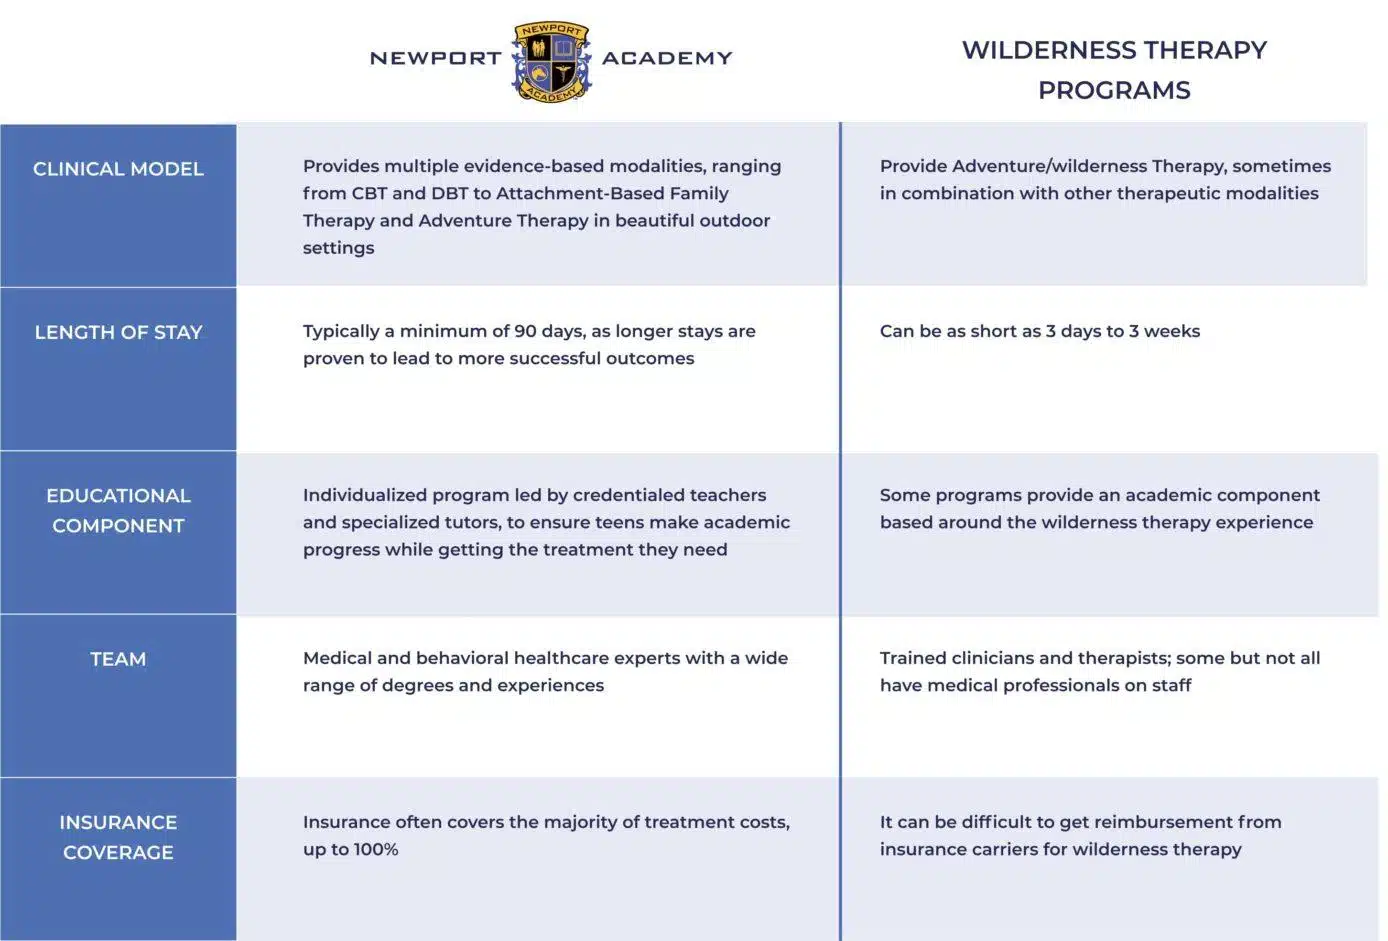 A chart comparing Newport Academy with typical Wilderness Therapy Programs. Row 1, Clinical Model: Newport Provides multiple evidence-based modalities, ranging from CBT and DBT to Attachment-Based Family Therapy and Adventure Therapy in beautiful outdoor settings. Wilderness programs Provide Adventure/wilderness Therapy, sometimes in combination with other therapeutic modalities. Row 2, Length of Stay. Newport Academy: Typically a minimum of 90 days, as longer stays are proven to lead to more successful outcomes. Wilderness programs Can be as short as 3 days to 3 weeks. Row 3 Educational Component. Newport: Individualized program led by credentialed teachers and specialized tutors, to ensure teens make academic progress while getting the treatment they need, Wilderness programs: Some programs provide an academic component based around the wilderness therapy experience. Row 4, Team. Newport: Medical and behavioral healthcare experts with a wide range of degrees and experiences. Wilderness programs: Trained clinicians and therapists; some but not all have medical professionals on staff. Row 5: Insurance Coverage. Newport: Insurance often covers the majority of treatment costs, up to 100%. Wilderness programs: It can be difficult to get reimbursement from insurance carriers for wilderness therapy.